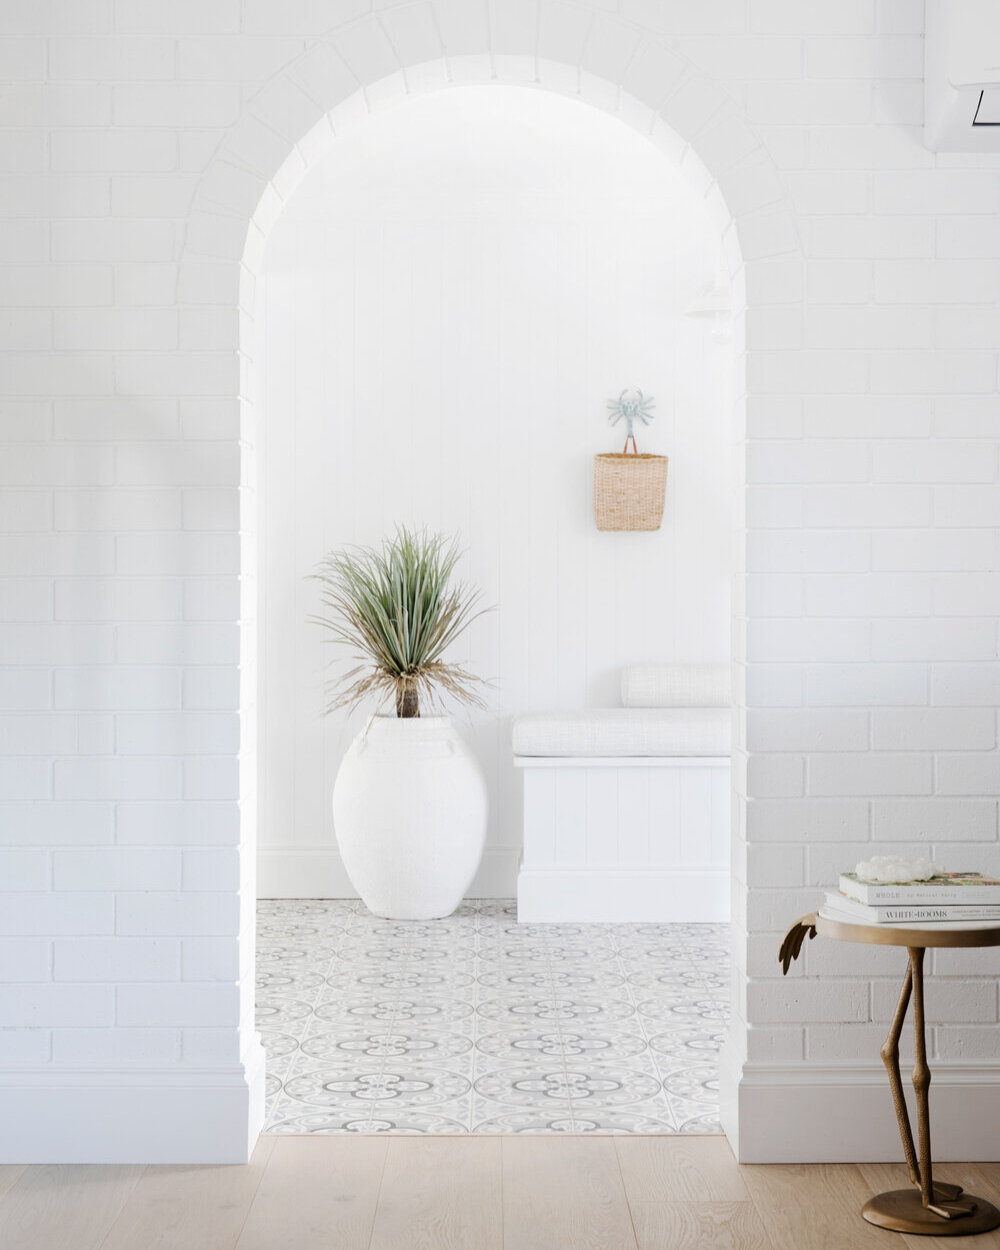 Painting your entire entranceway white works well to introduce a coastal interior style, just add lots of texture to keep it interesting. Wall lights, hooks, and patterned tiles create a fresh, welcoming vibe that's practical too.​​​​​​​​​
Source | t